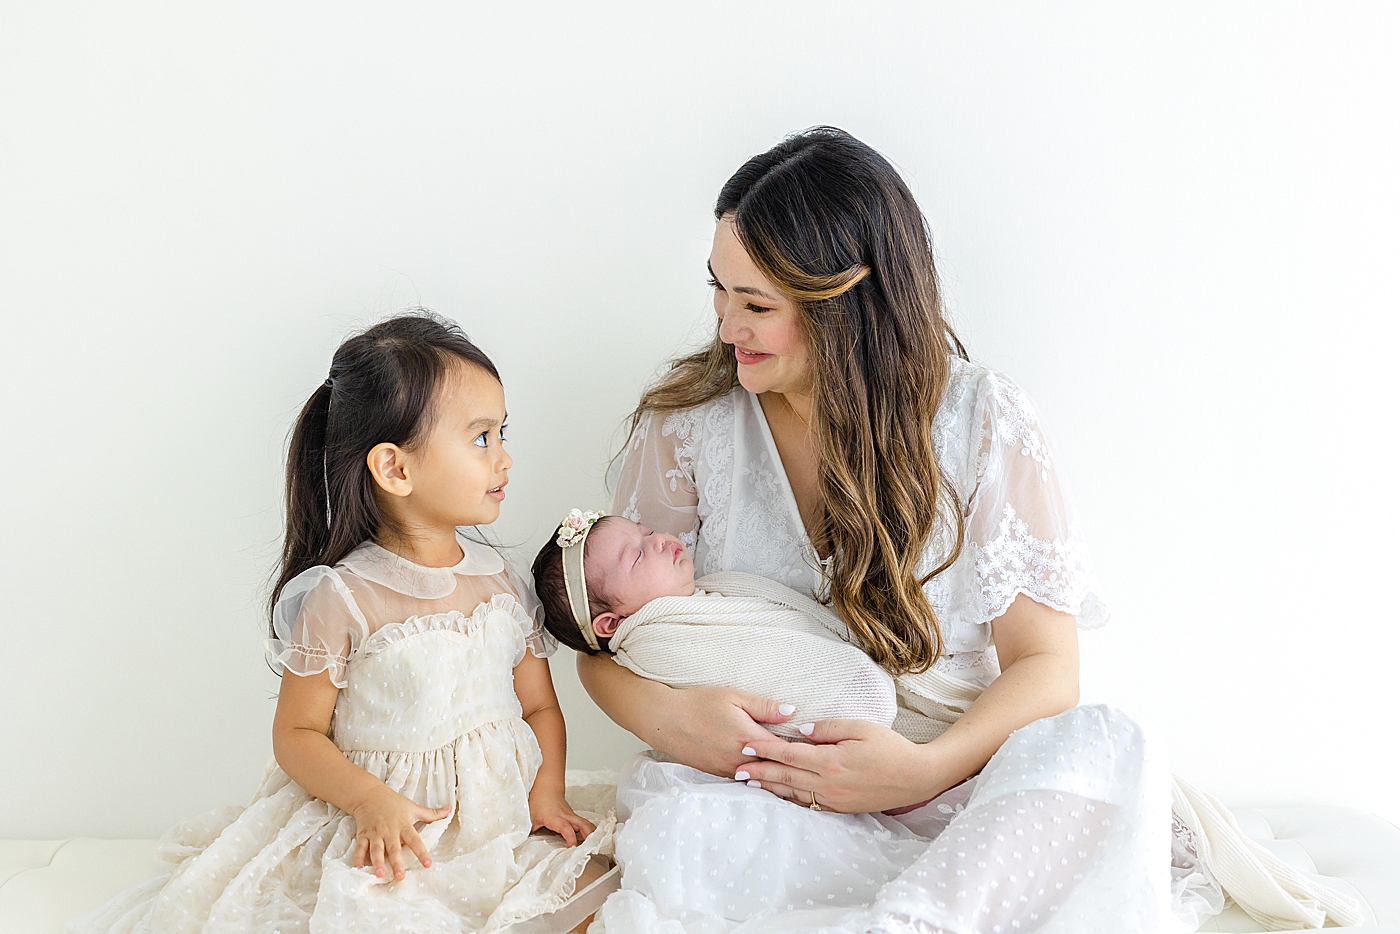 Mom sitting with her two baby girls in white | Photo by Sana Ahmed Photography